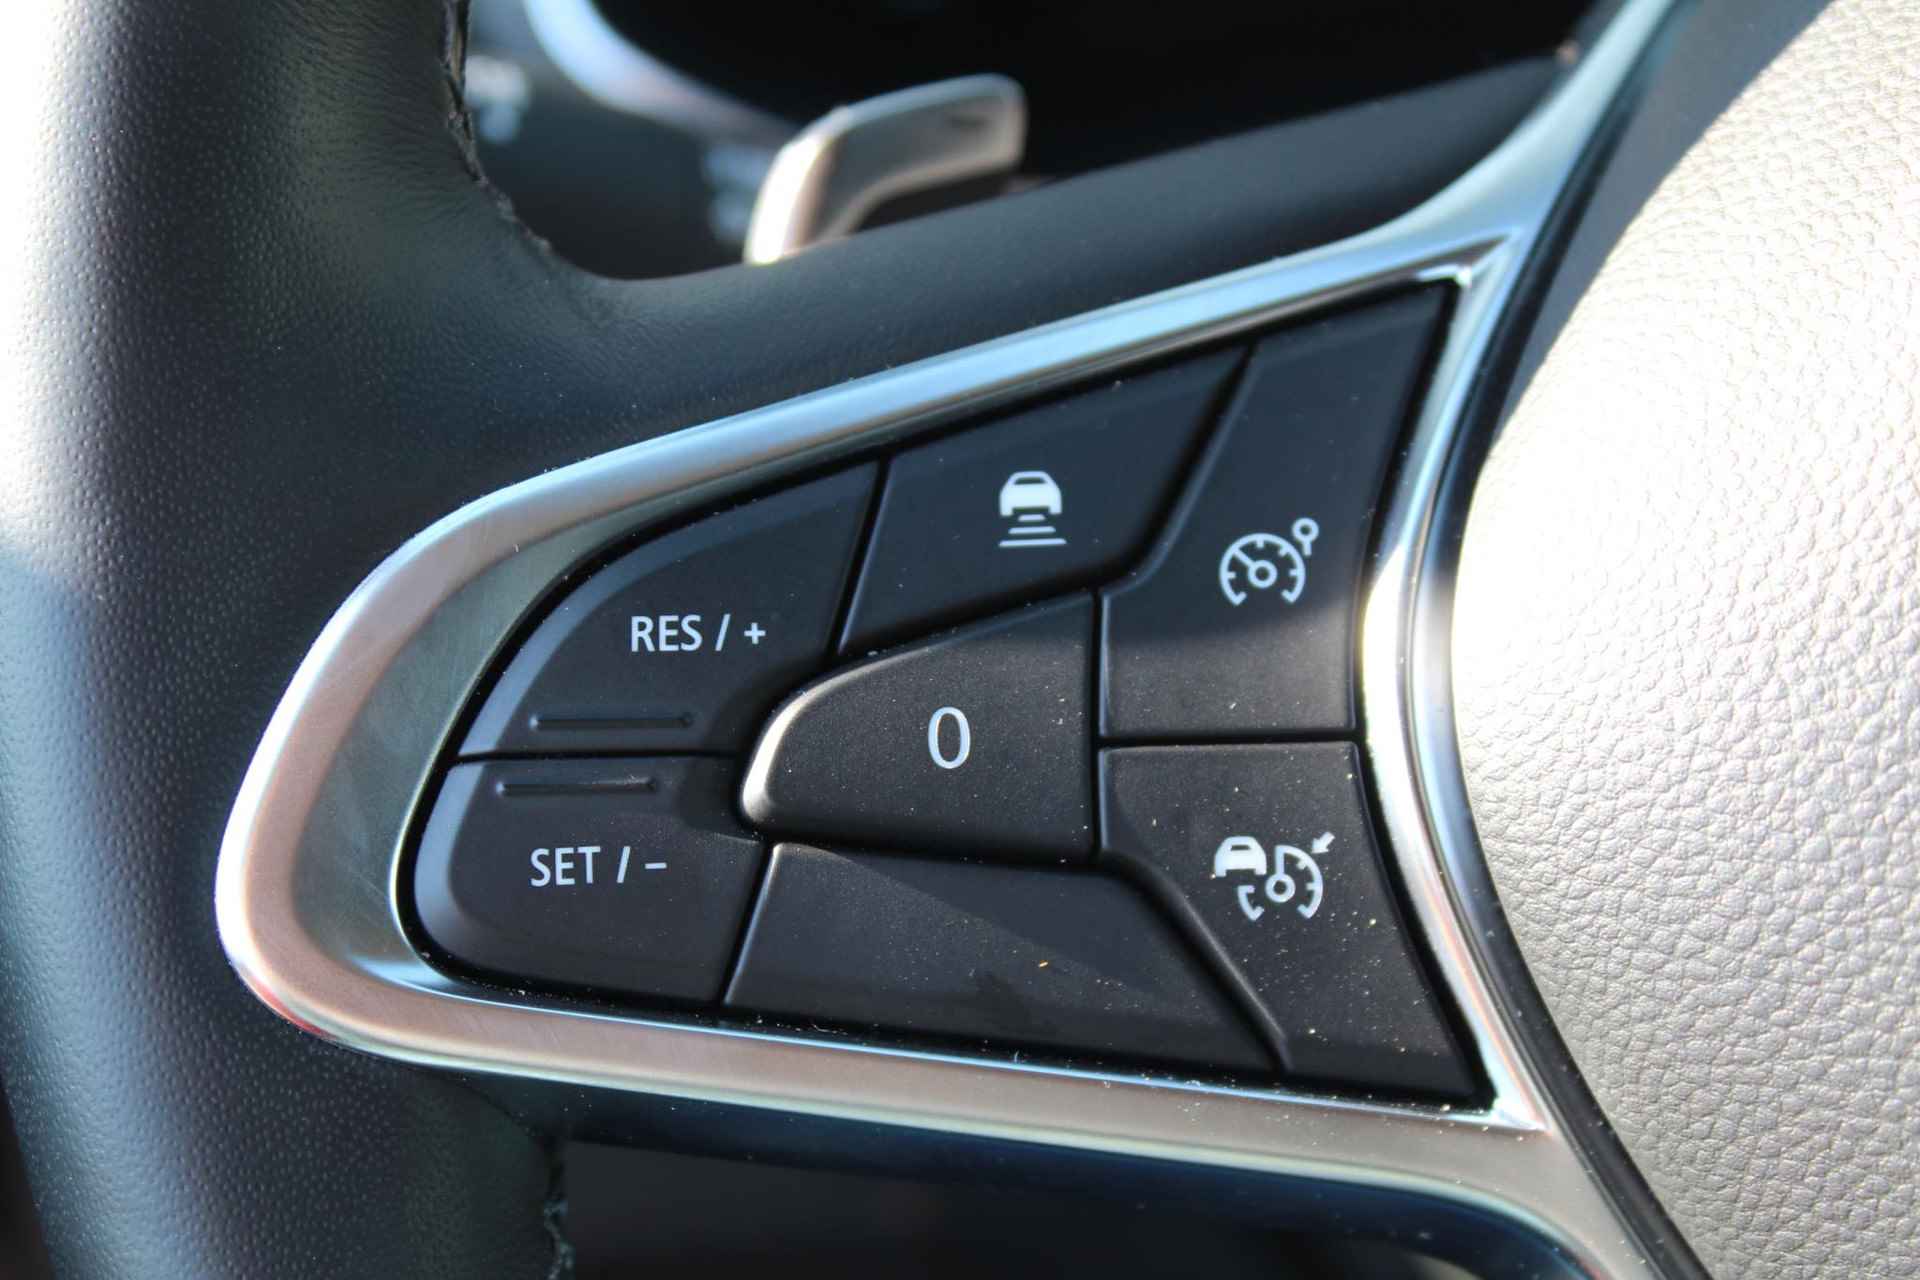 Mitsubishi ASX 1.3 DI-T 7DCT First Edition / Cruise Control Adaptief / Keyless Entry & Start / Dodehoekdetectie / Achteruitrijcamera / Navigatie + Apple Carplay/Android Auto / - 10/43